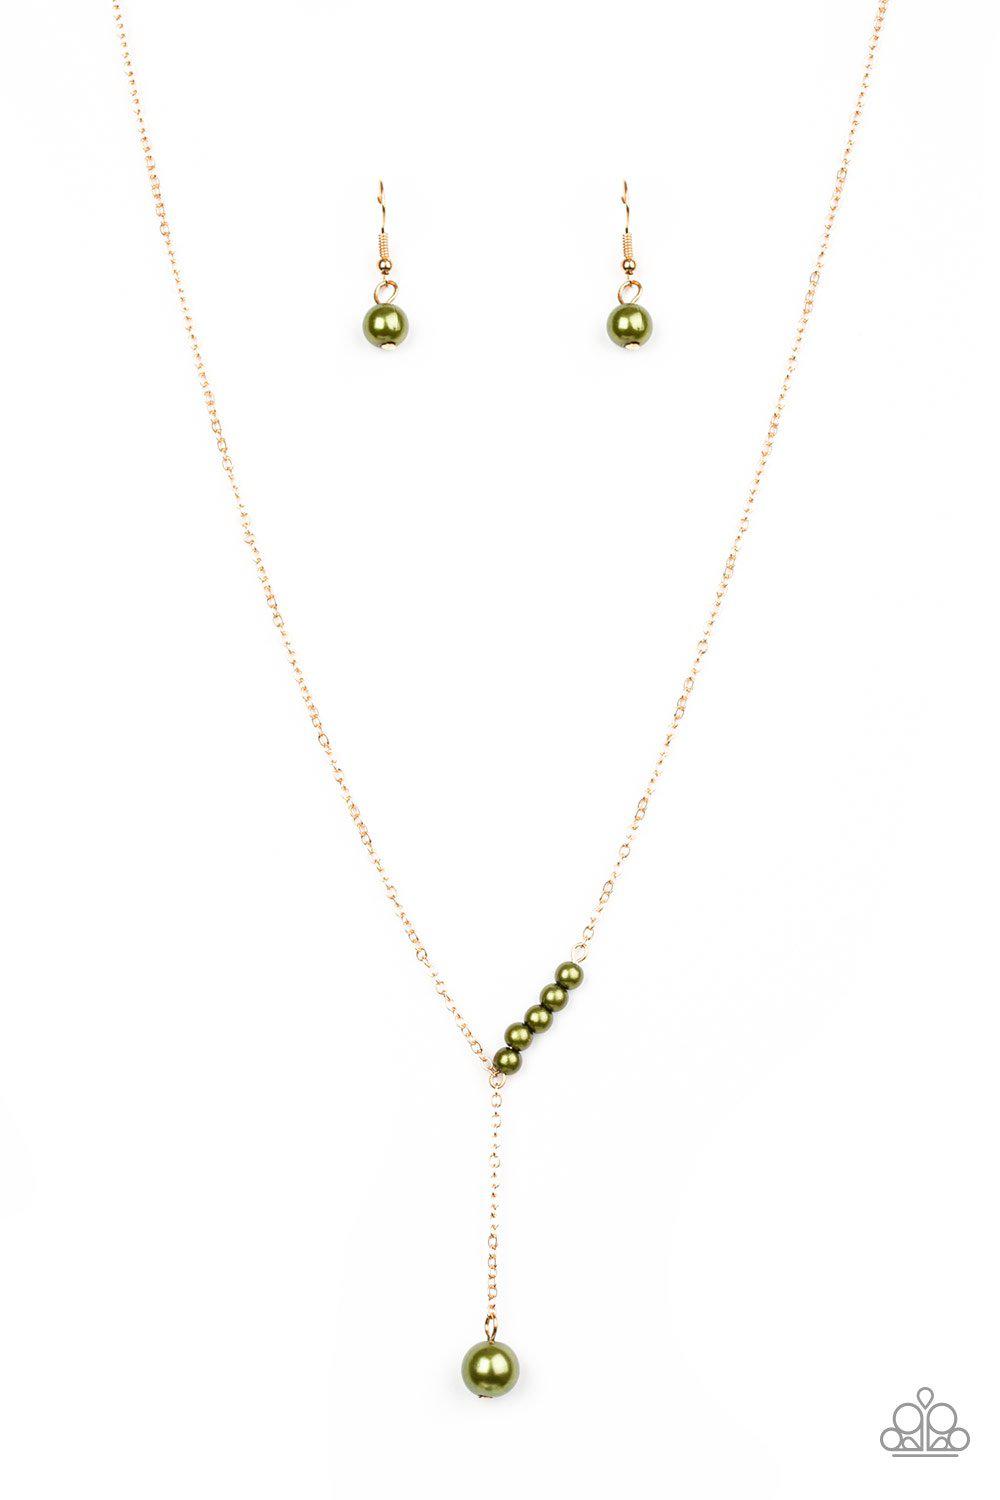 Timeless Taste Green and Gold Necklace - Paparazzi Accessories - lightbox -CarasShop.com - $5 Jewelry by Cara Jewels